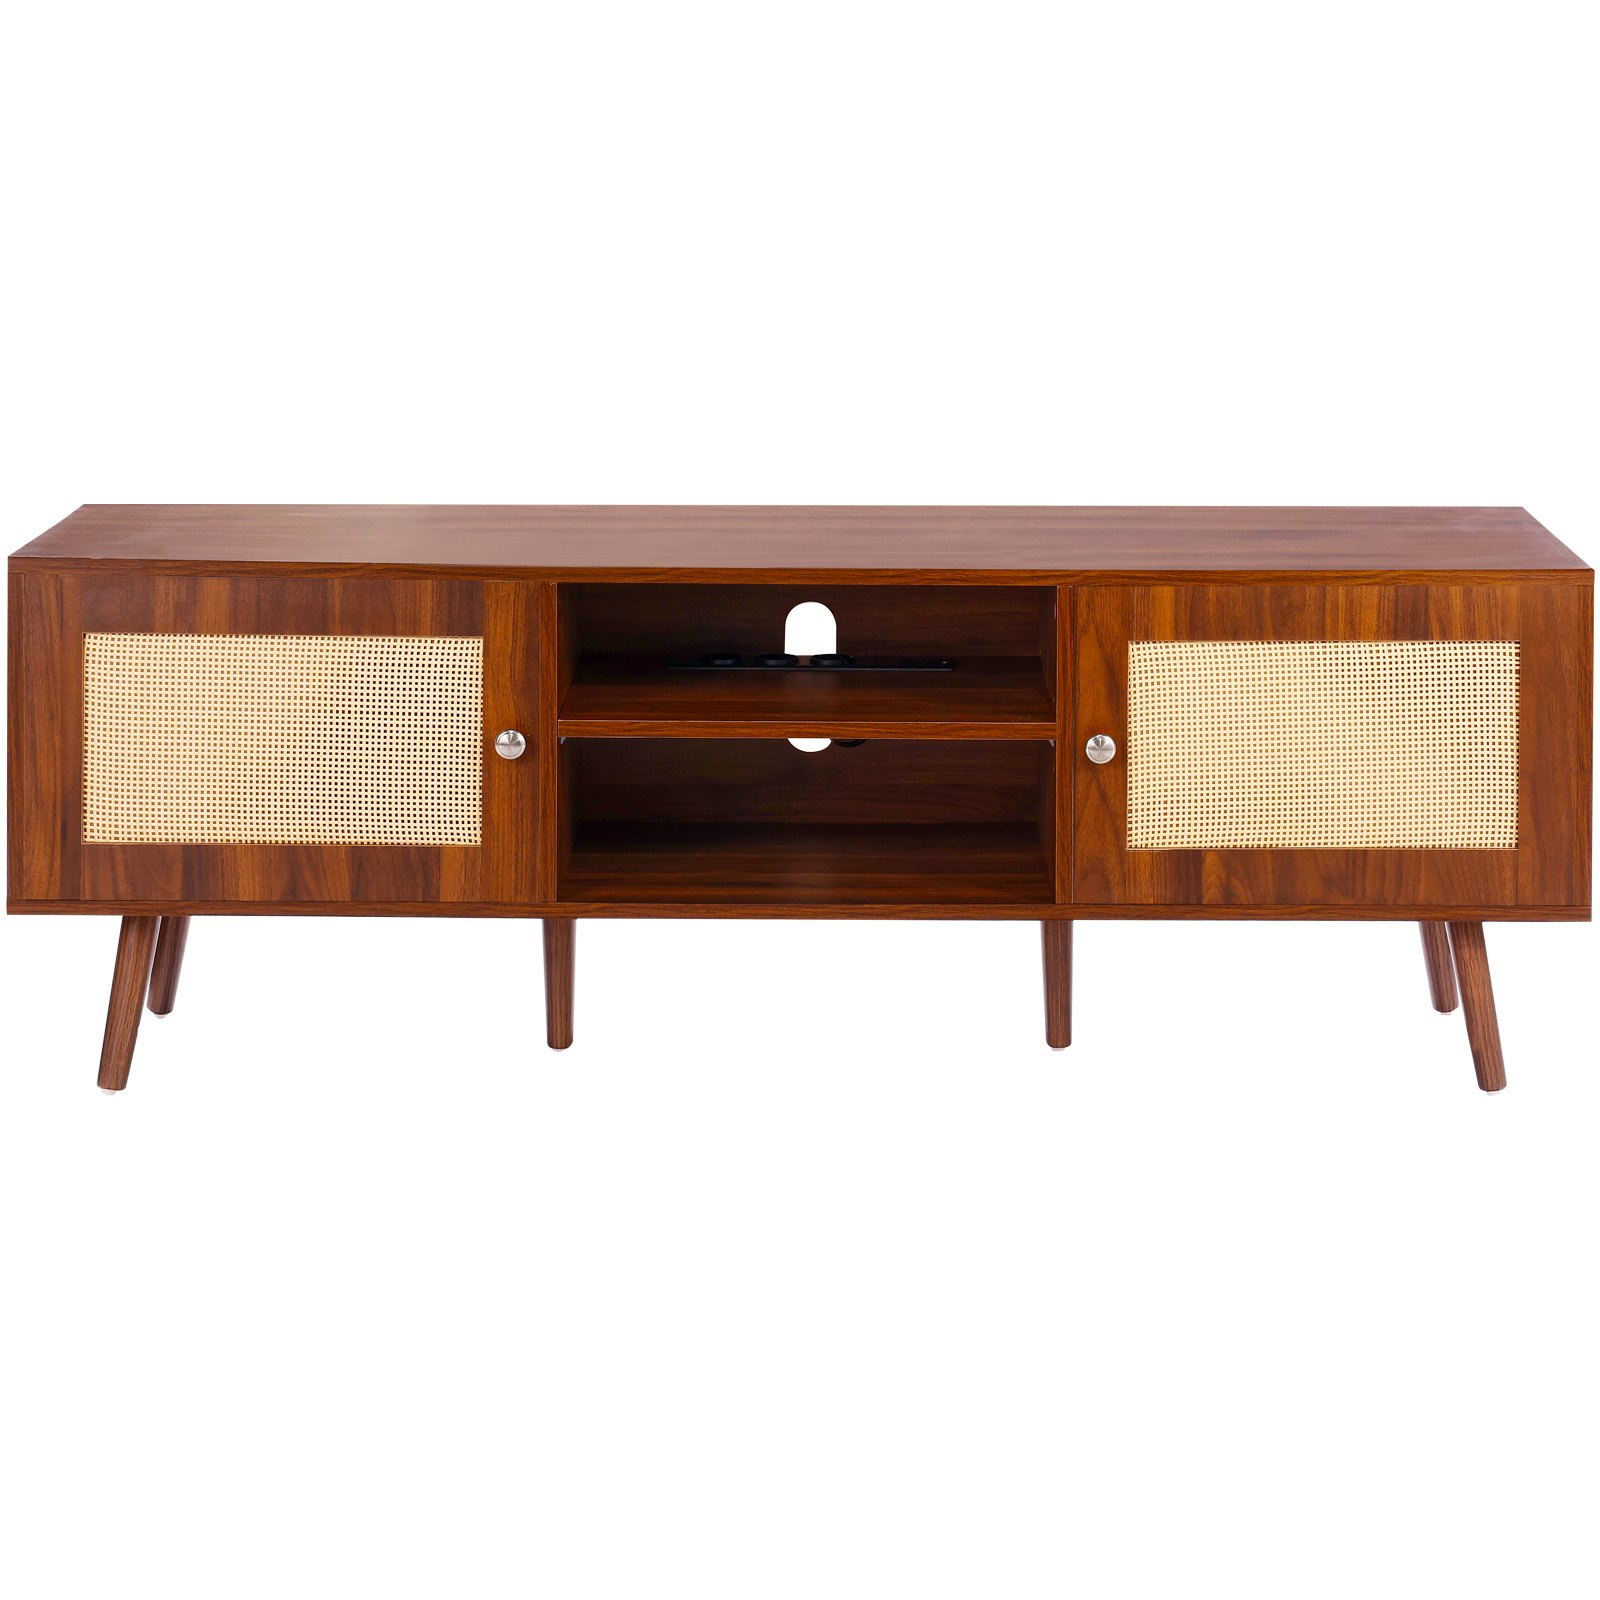 VEVOR Rattan TV Stand, Mid Century Modern TV Stand for 65 inch TV, Boho Rattan TV Cabinet with Build-in Socket and USB Ports, Adjustable Shelfs for Living Room, Media Room, Walnut, Goodies N Stuff